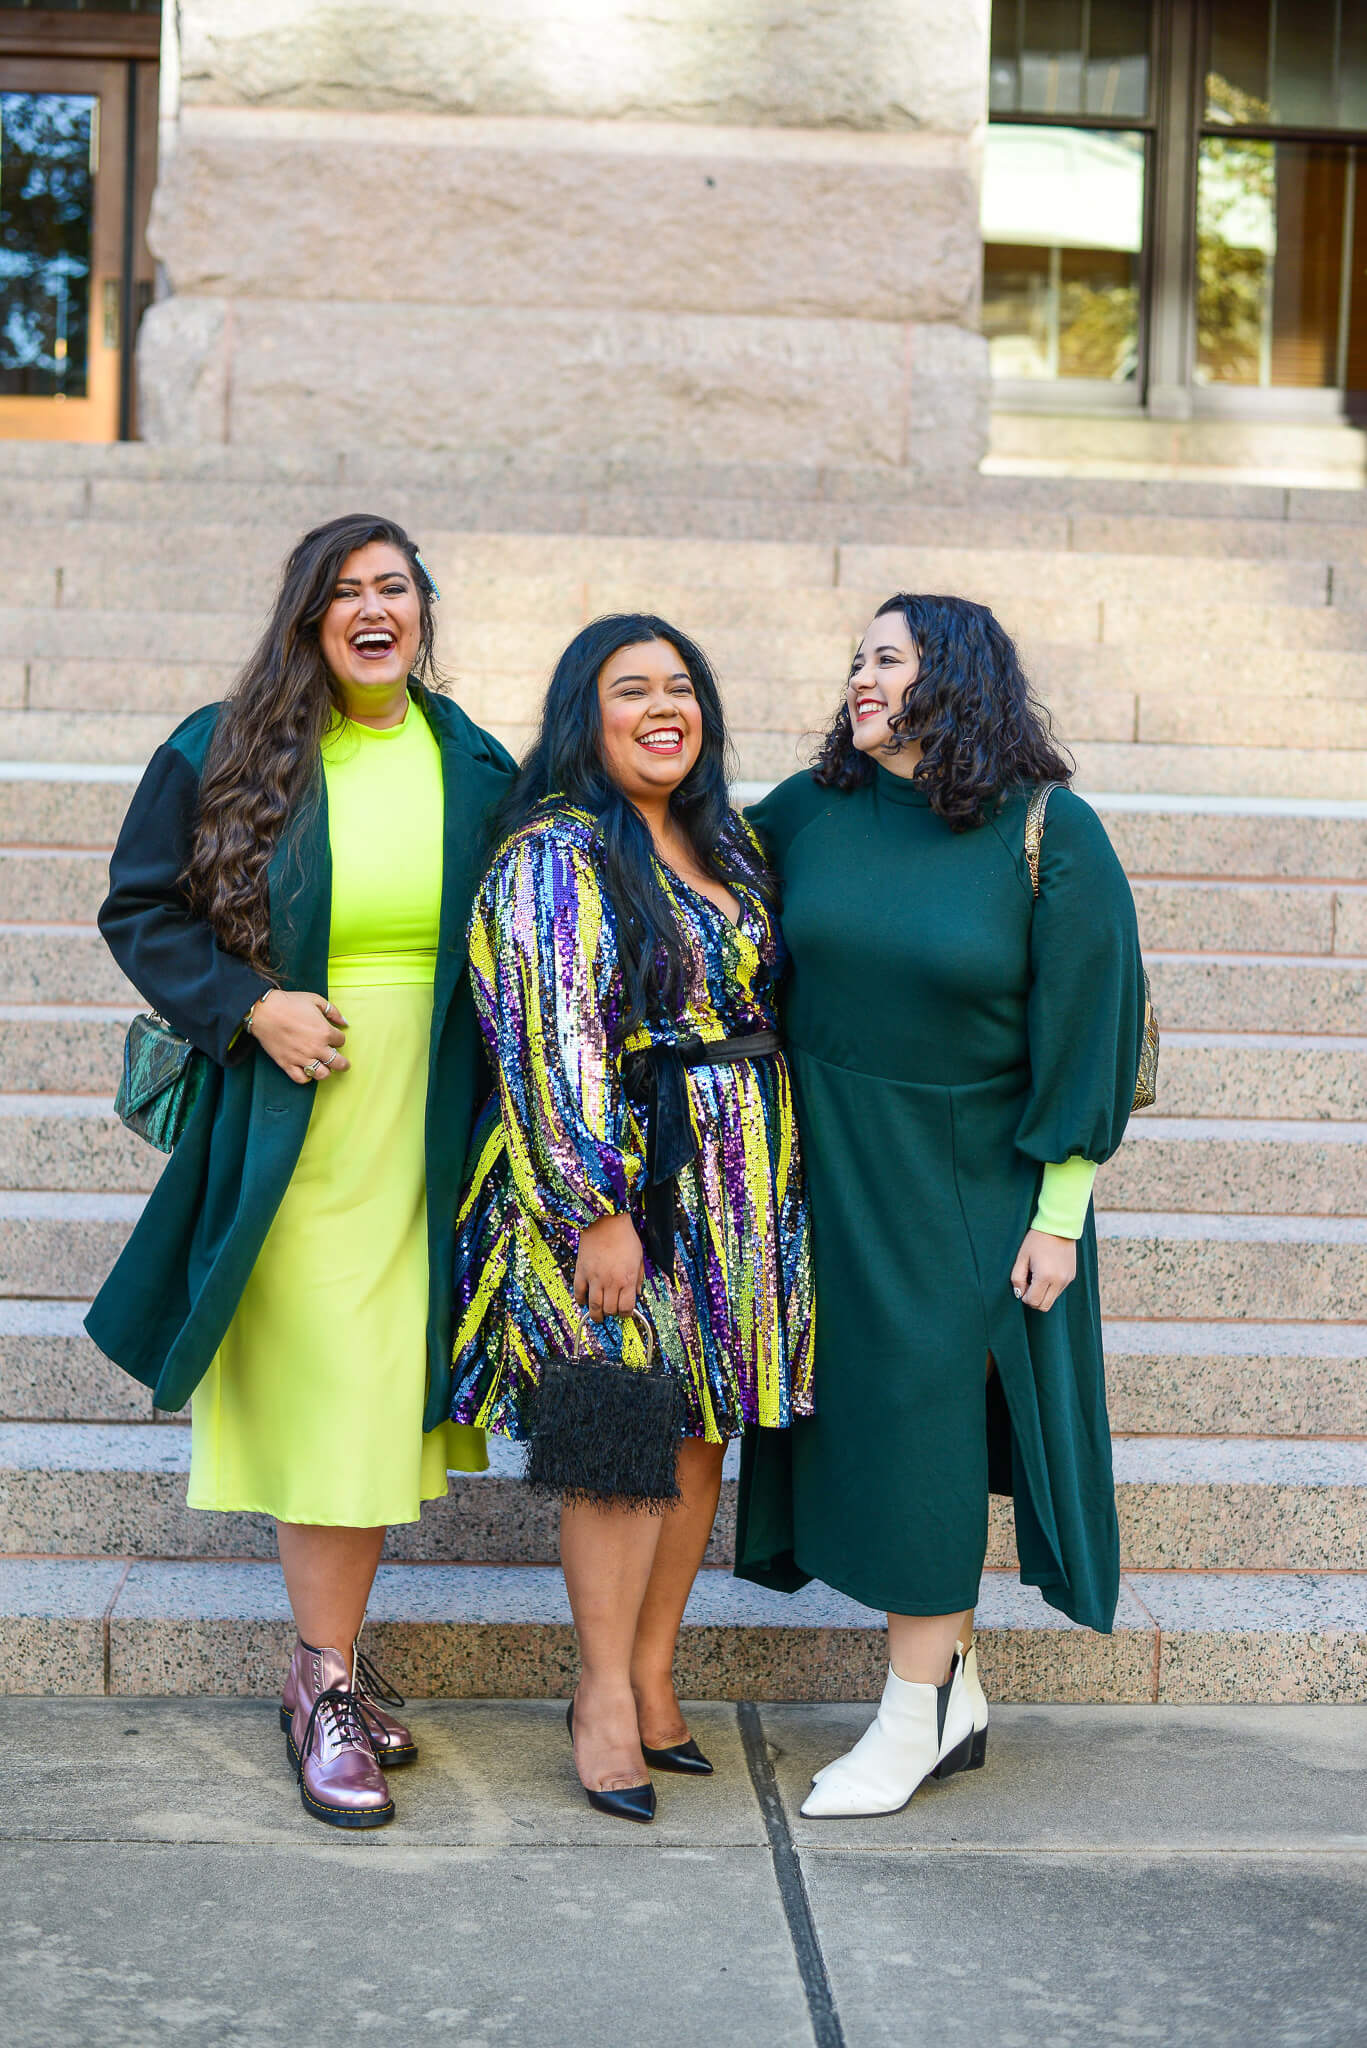 What to wear on a girl's weekend trip plus size